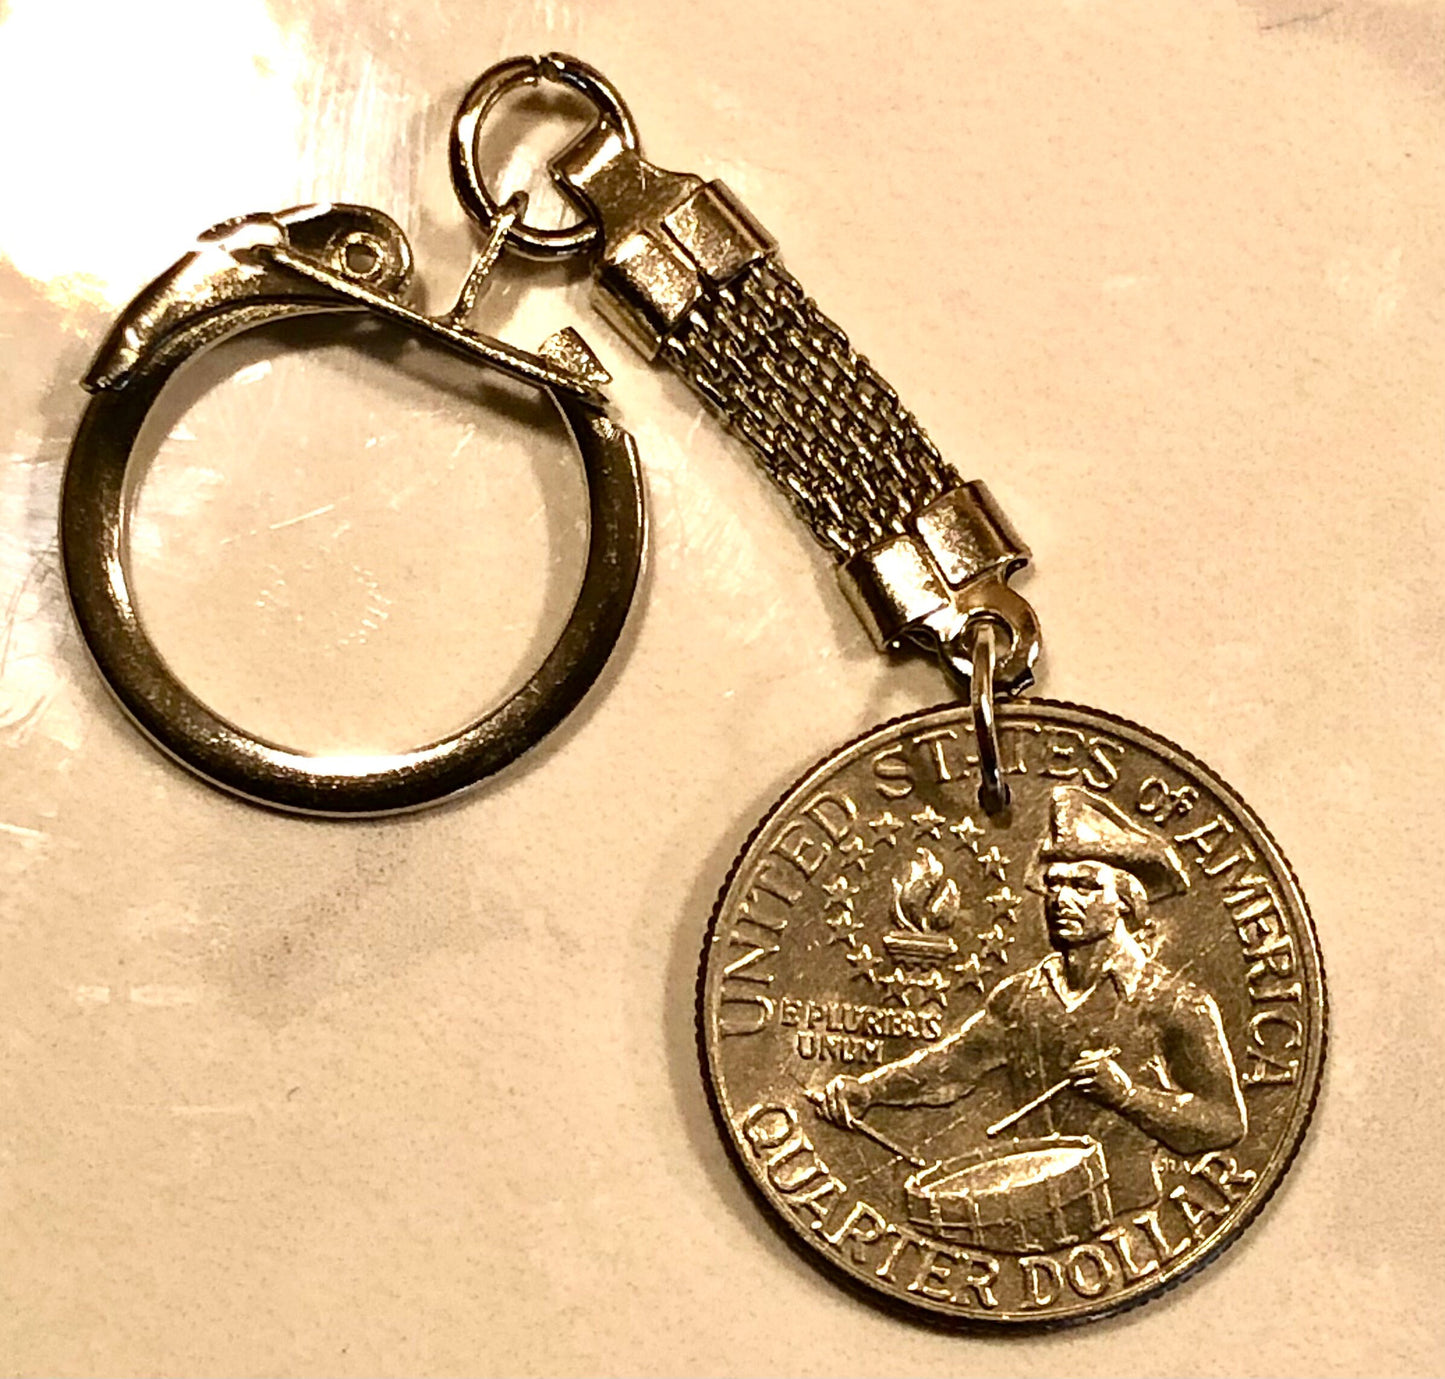 Parks Quarter Keychain United States America USA Coin Custom Made Charm Gift For Friend Coin Charm Gift For Him, Coin Collector, World Coins